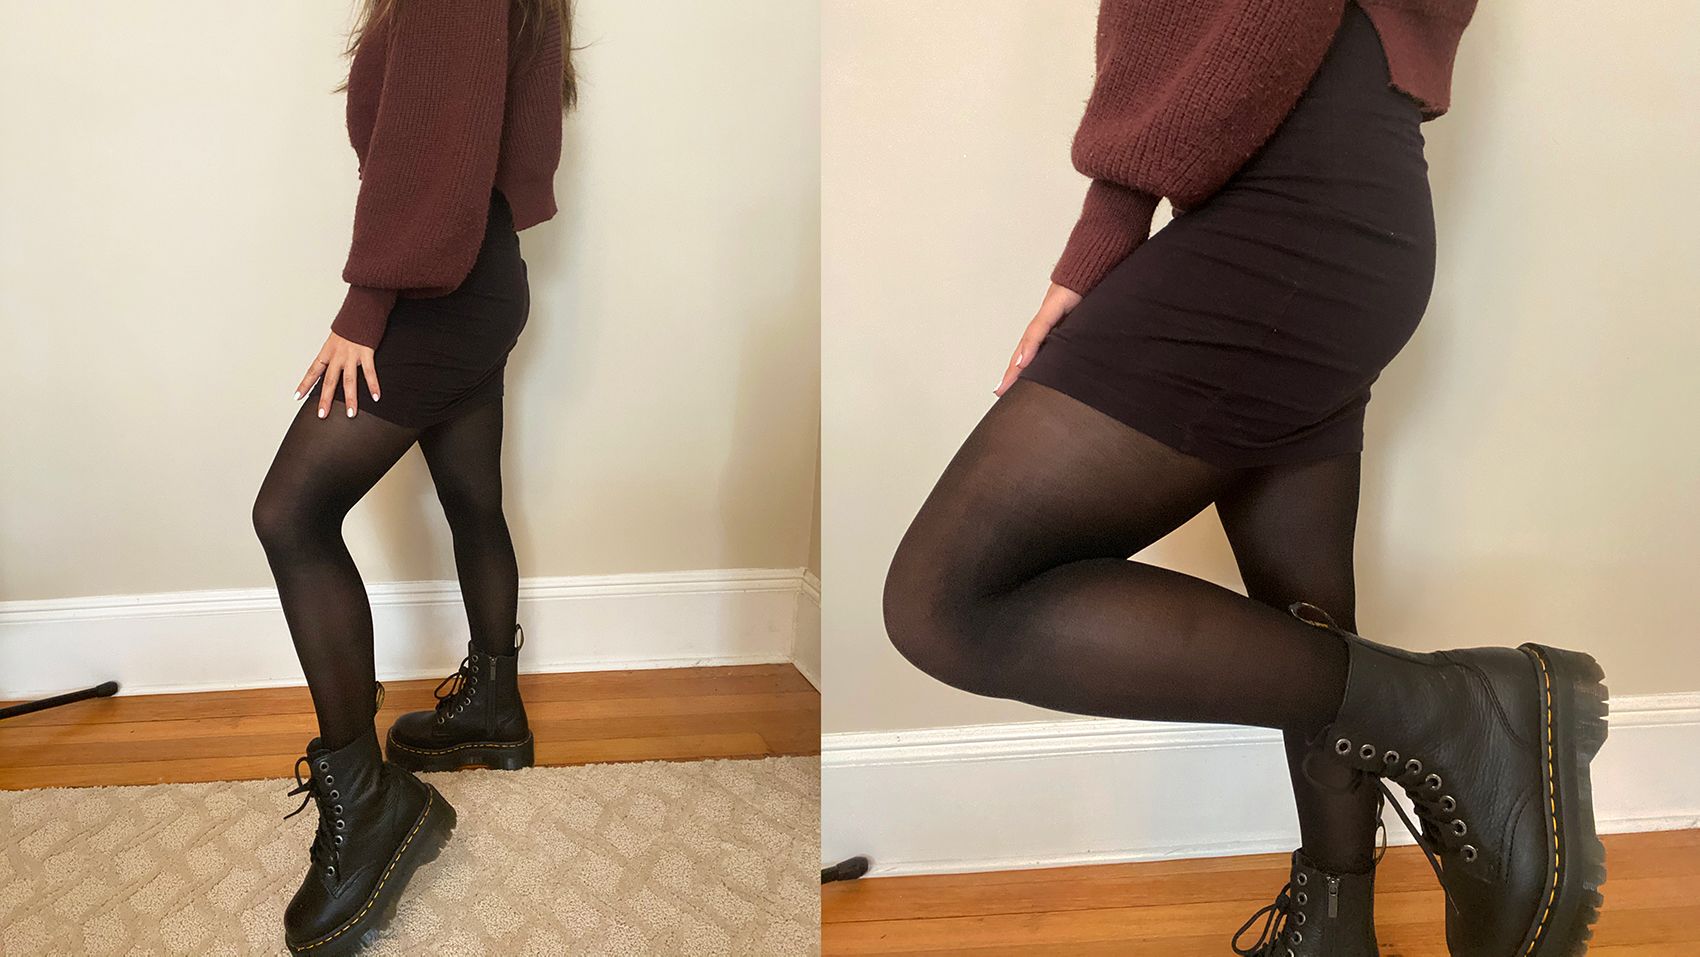 PANTYHOSE 2 in 1 & Leather Leggings Style TIGHTS REVIEW, TRY ON